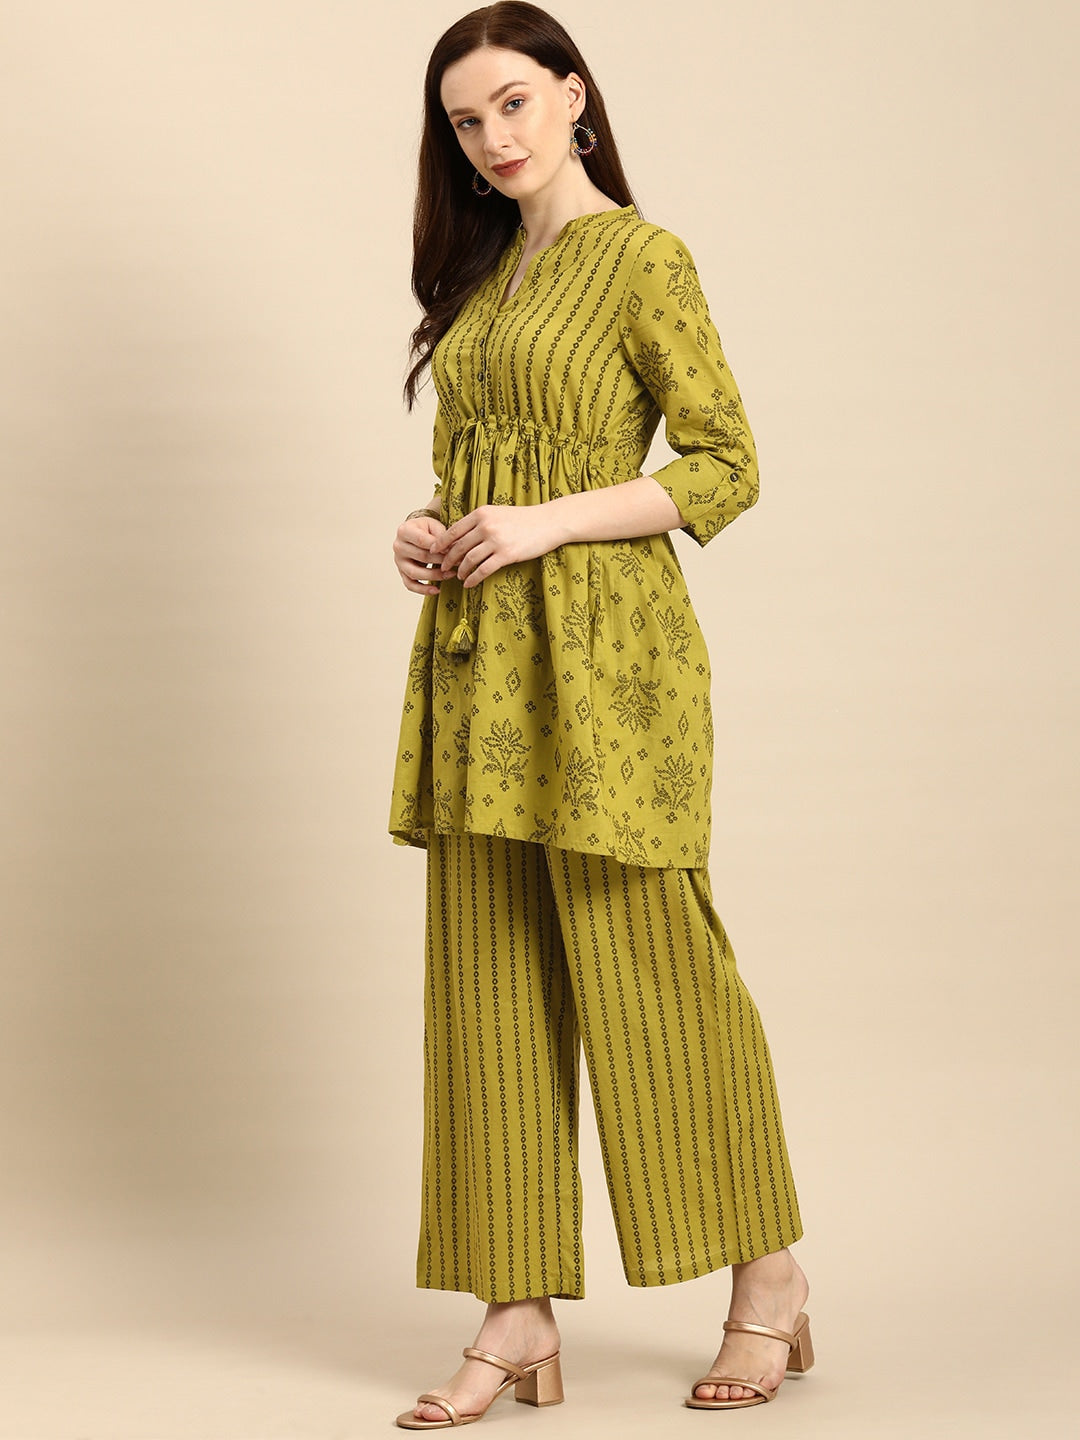 Kurti Set with Dupatta & Palazzo is the Best Ethnic Wear For Women's  Fashion Stylish Kurta with dupatta is soft and comfortable Kurtis Color  Purple & Yellow Set Best for party Heavy